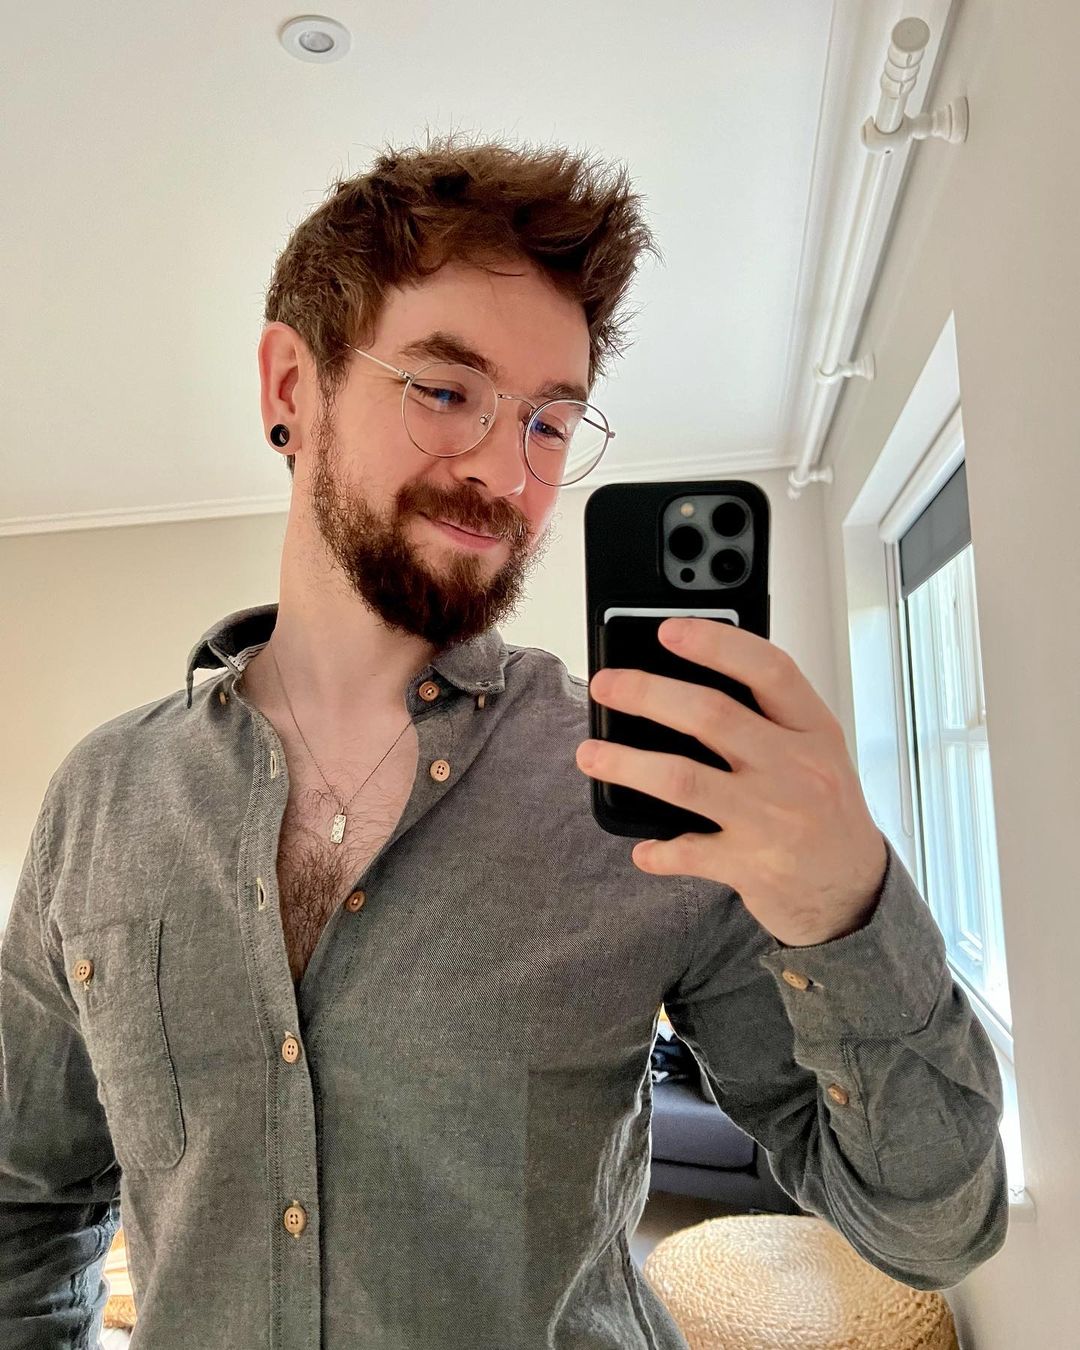 Jacksepticeye taking a selfie at his house